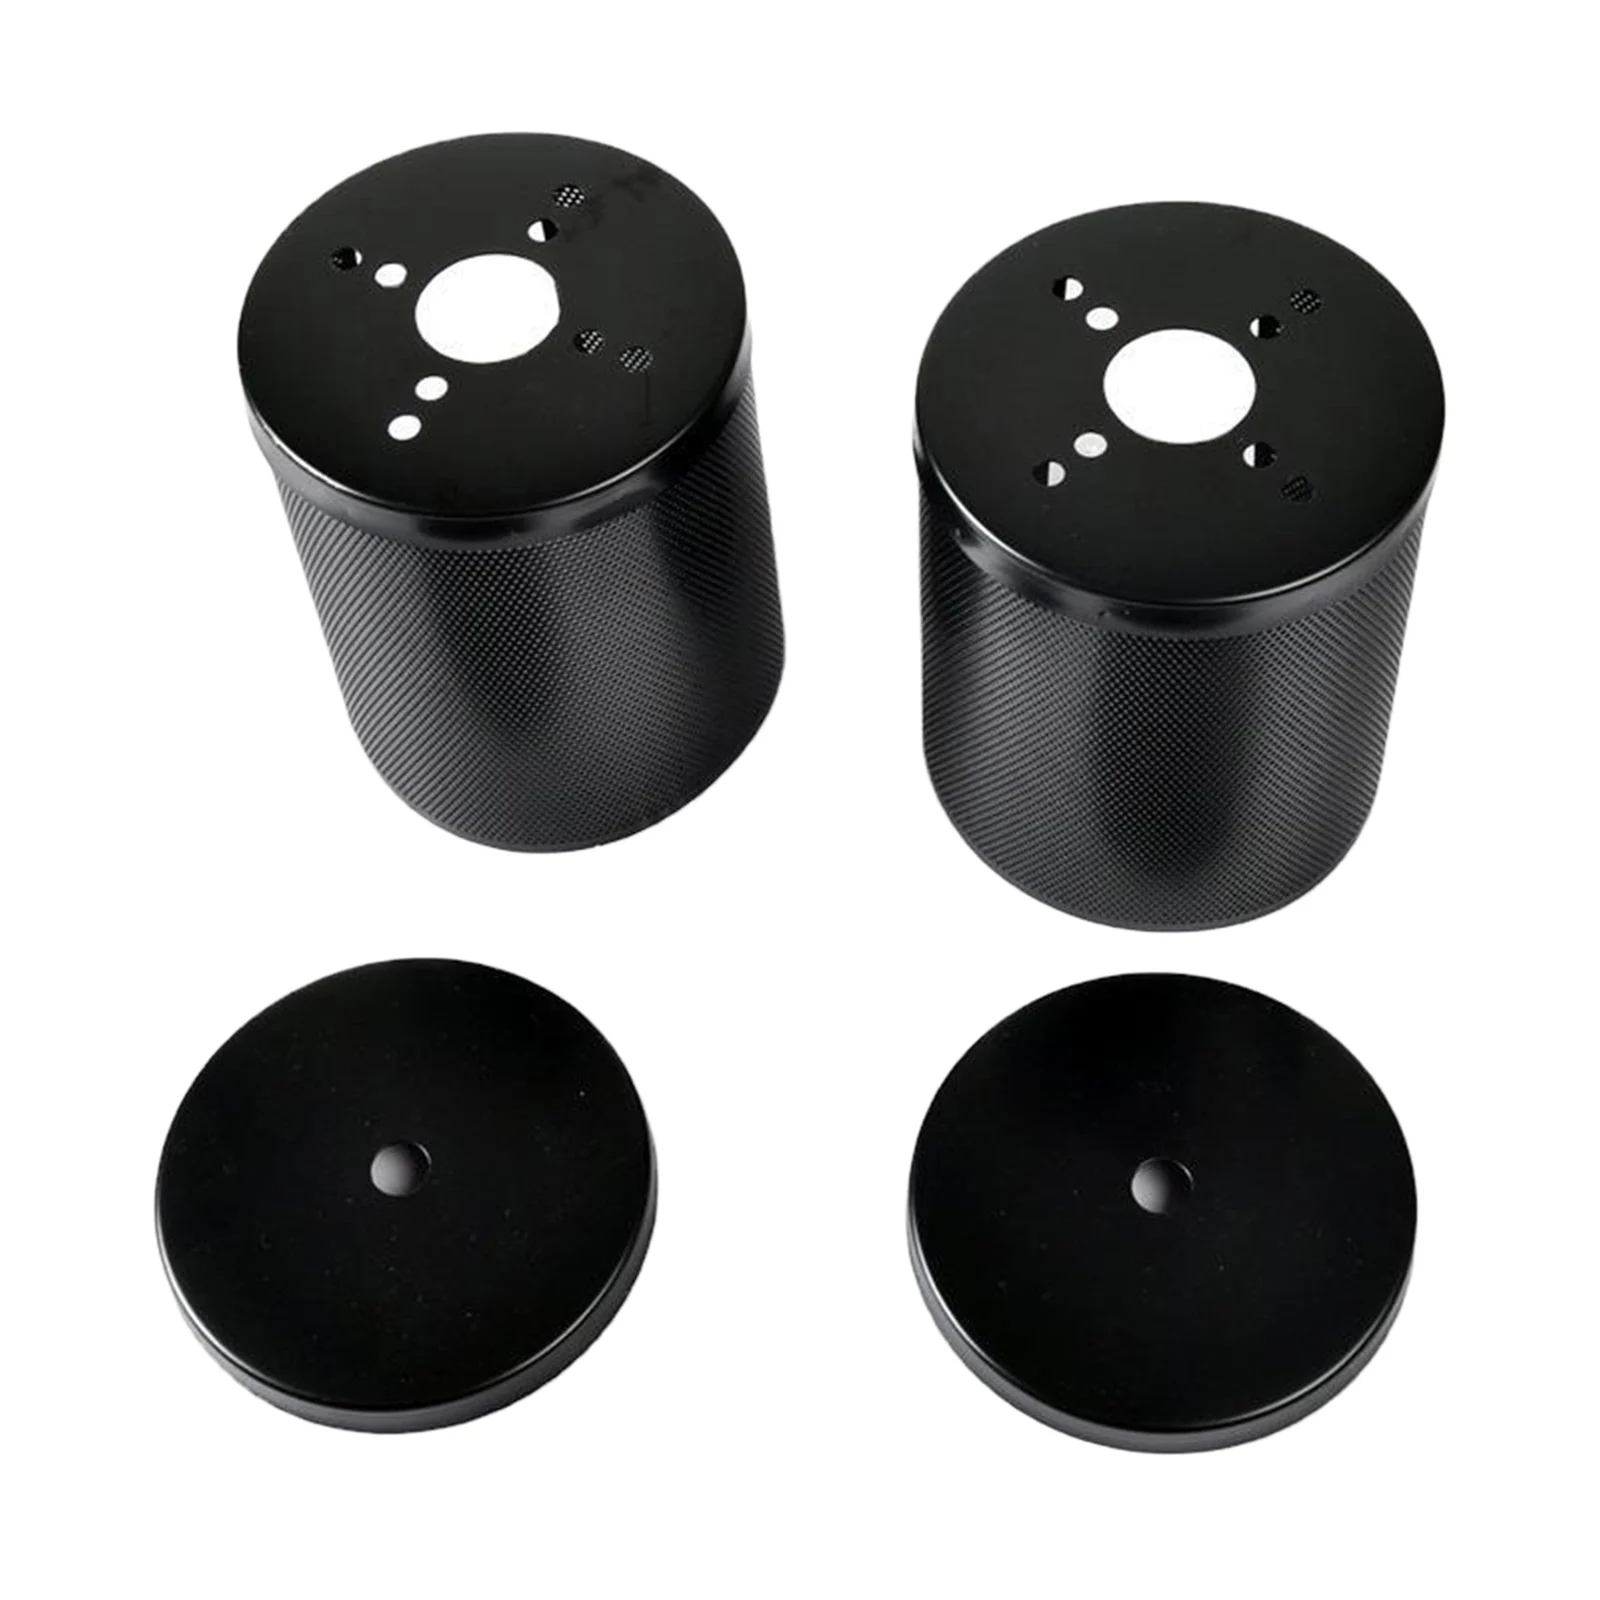 2 Pcs Skateboard Motor Protection Cover for Mountain Skateboard Truck Motor Covers for 6065 6374 Motor Outdoor Sports Parts